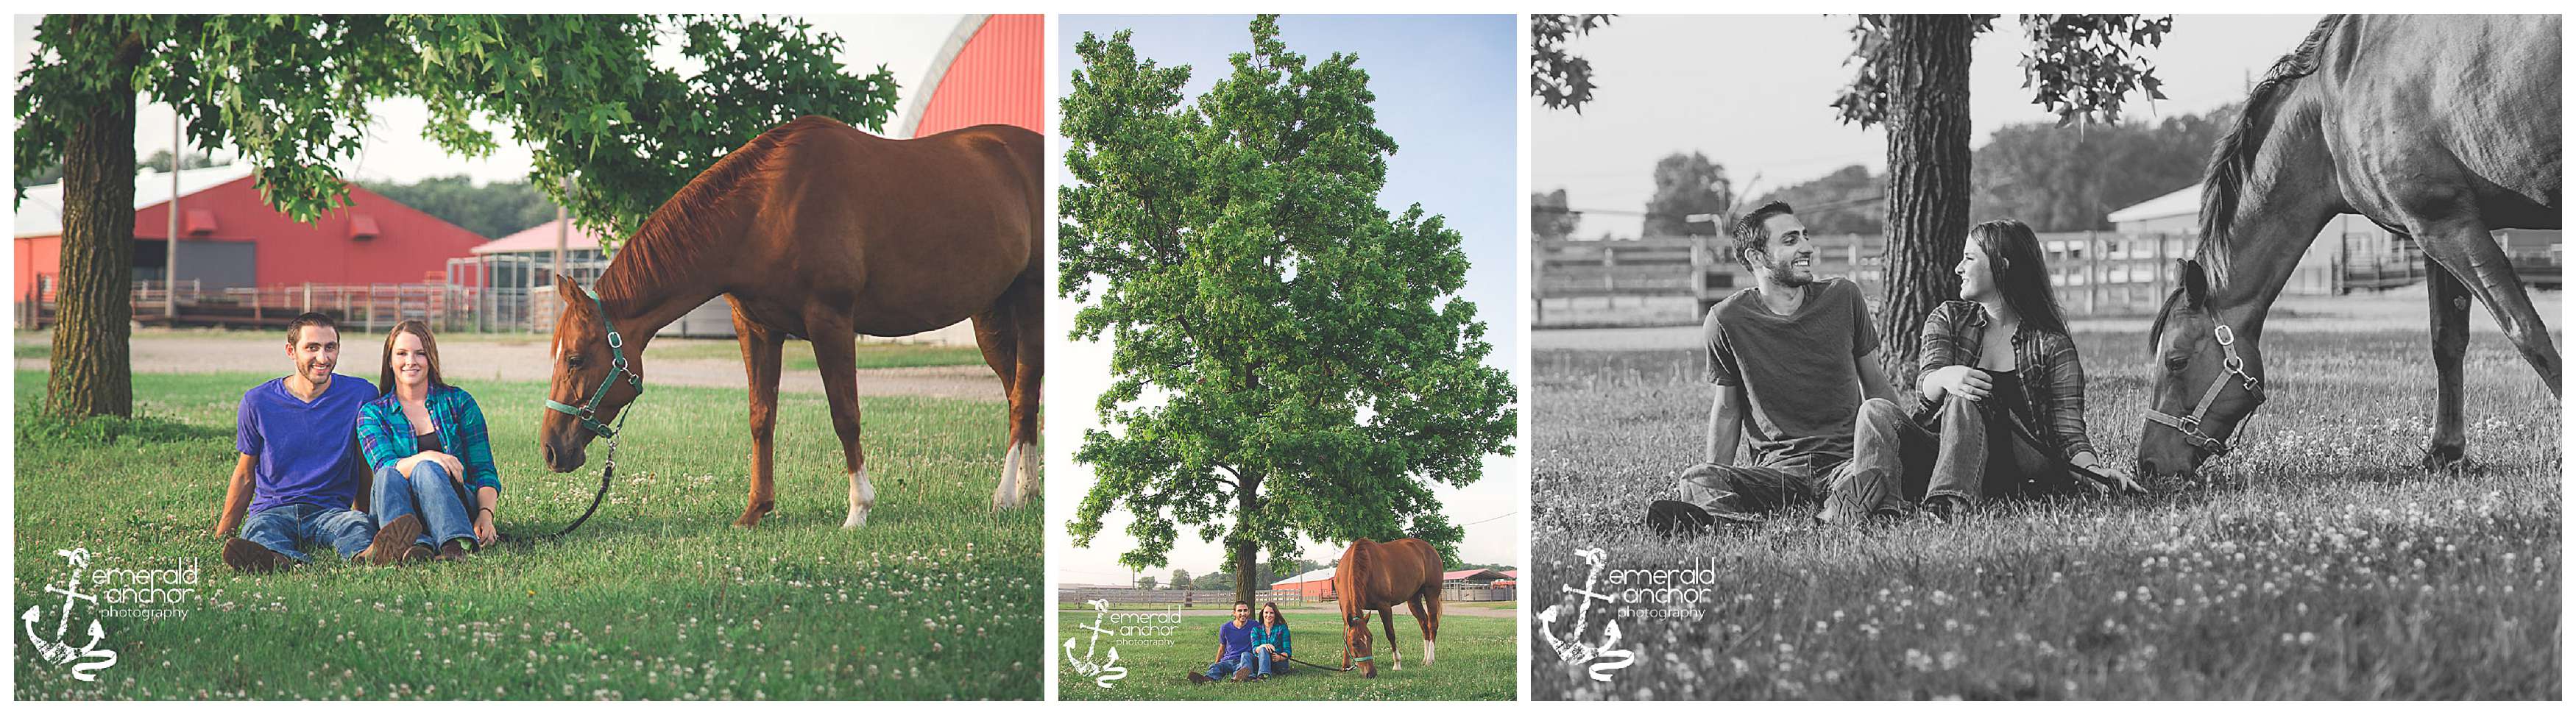 OSU equine center Engagement Photography Emerald Anchor Photography (17)